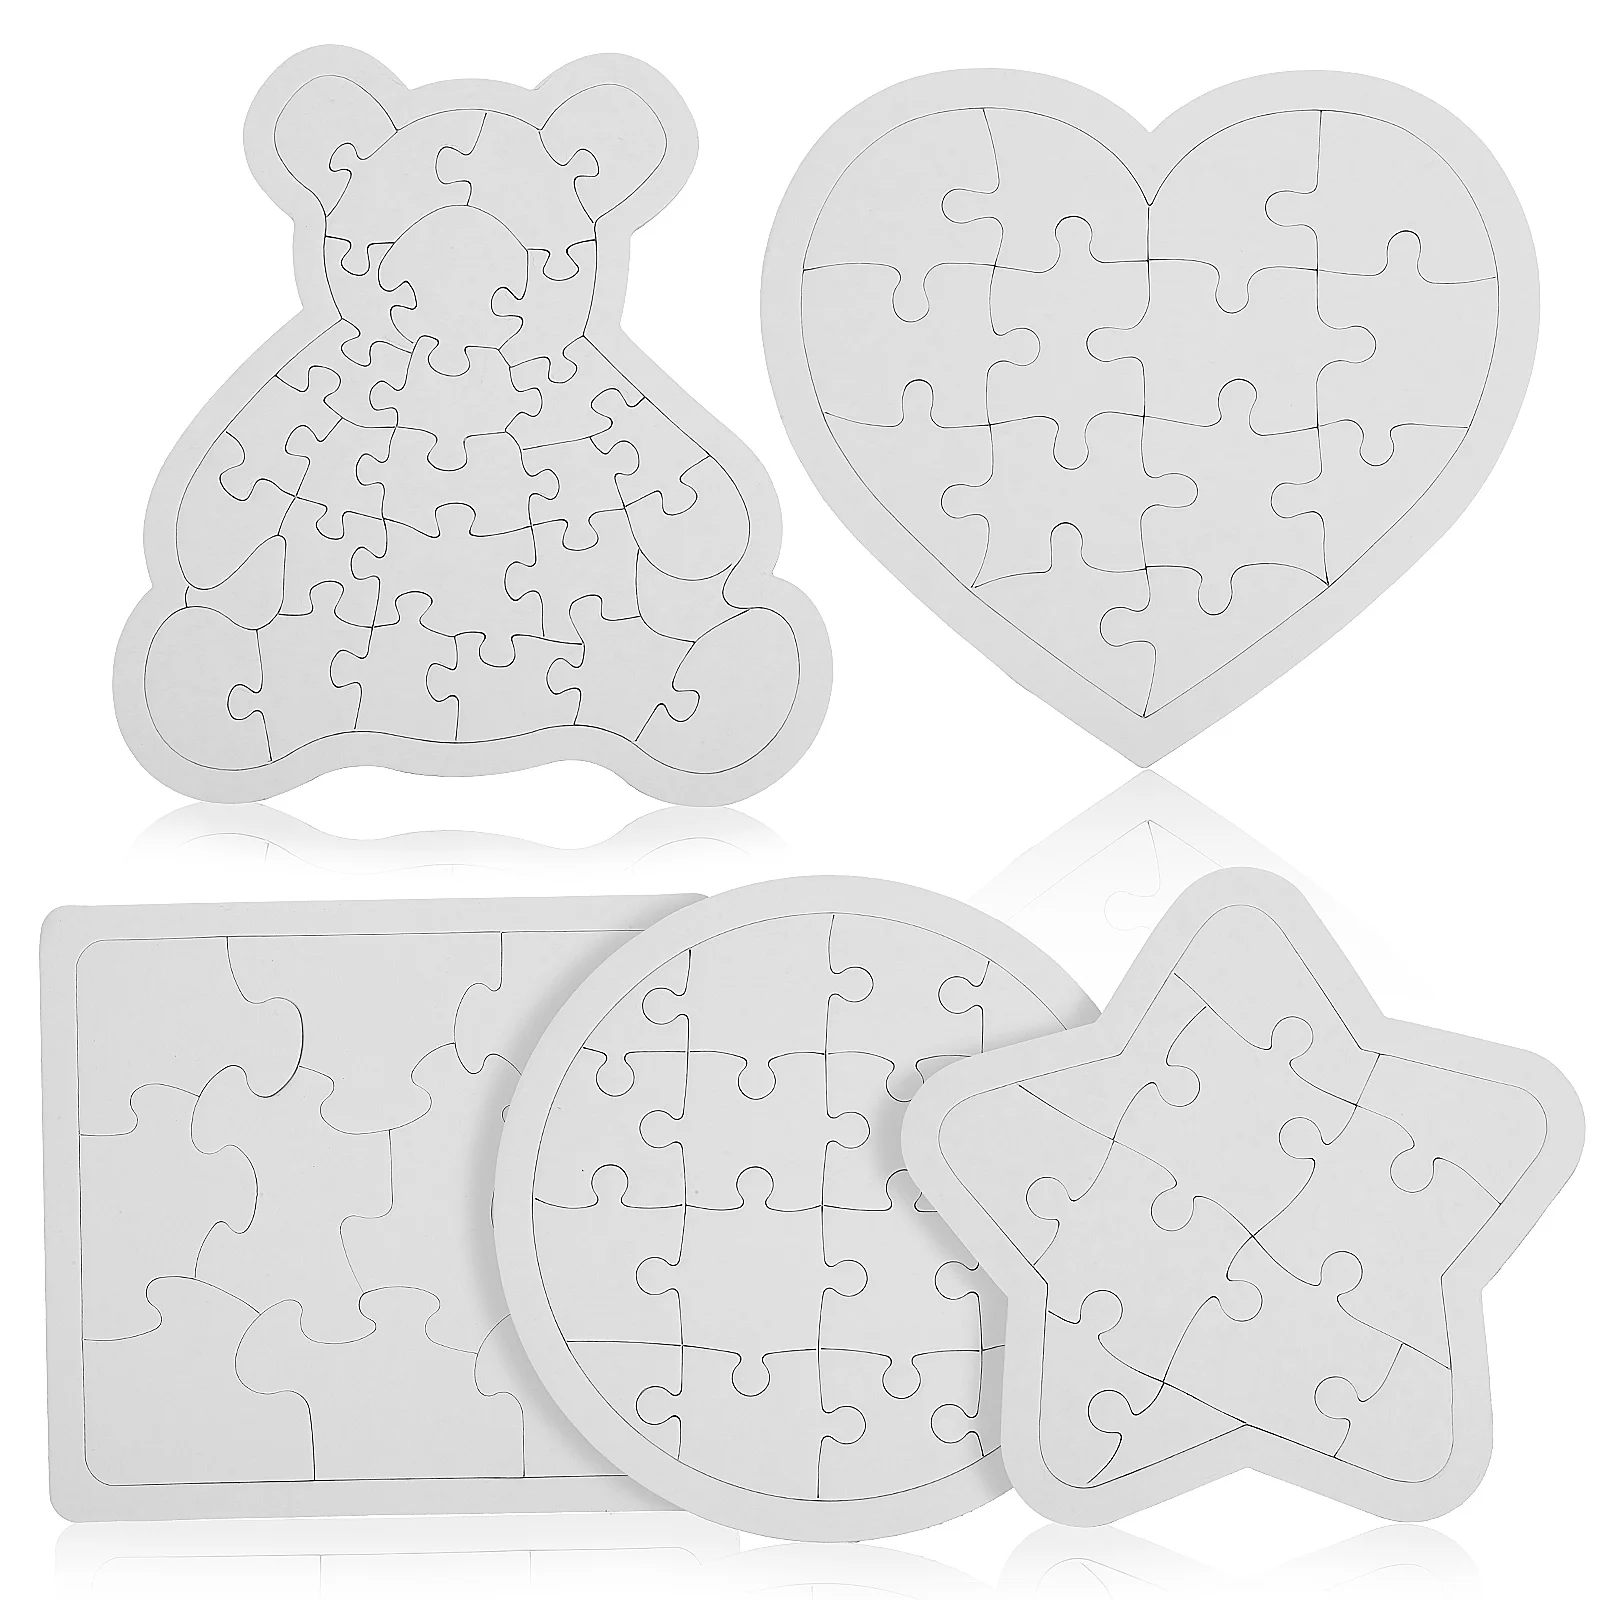 

5 Pcs Paper Puzzles Blank Round Heart-shaped Empty Jigsaw Toddler Childrens Toys